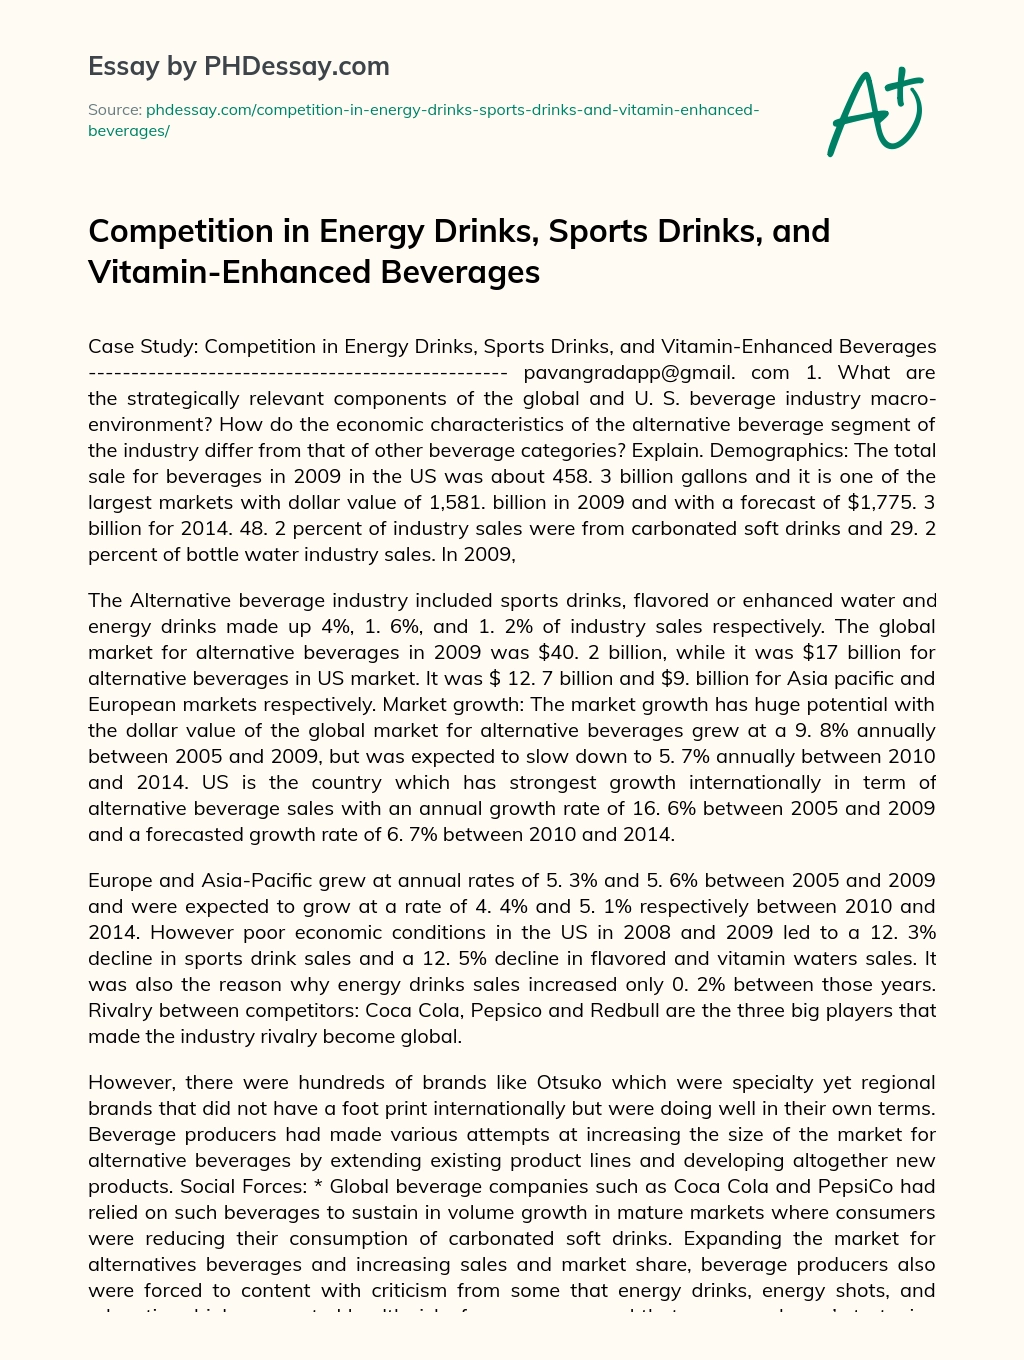 Competition in Energy Drinks, Sports Drinks, and Vitamin-Enhanced Beverages essay